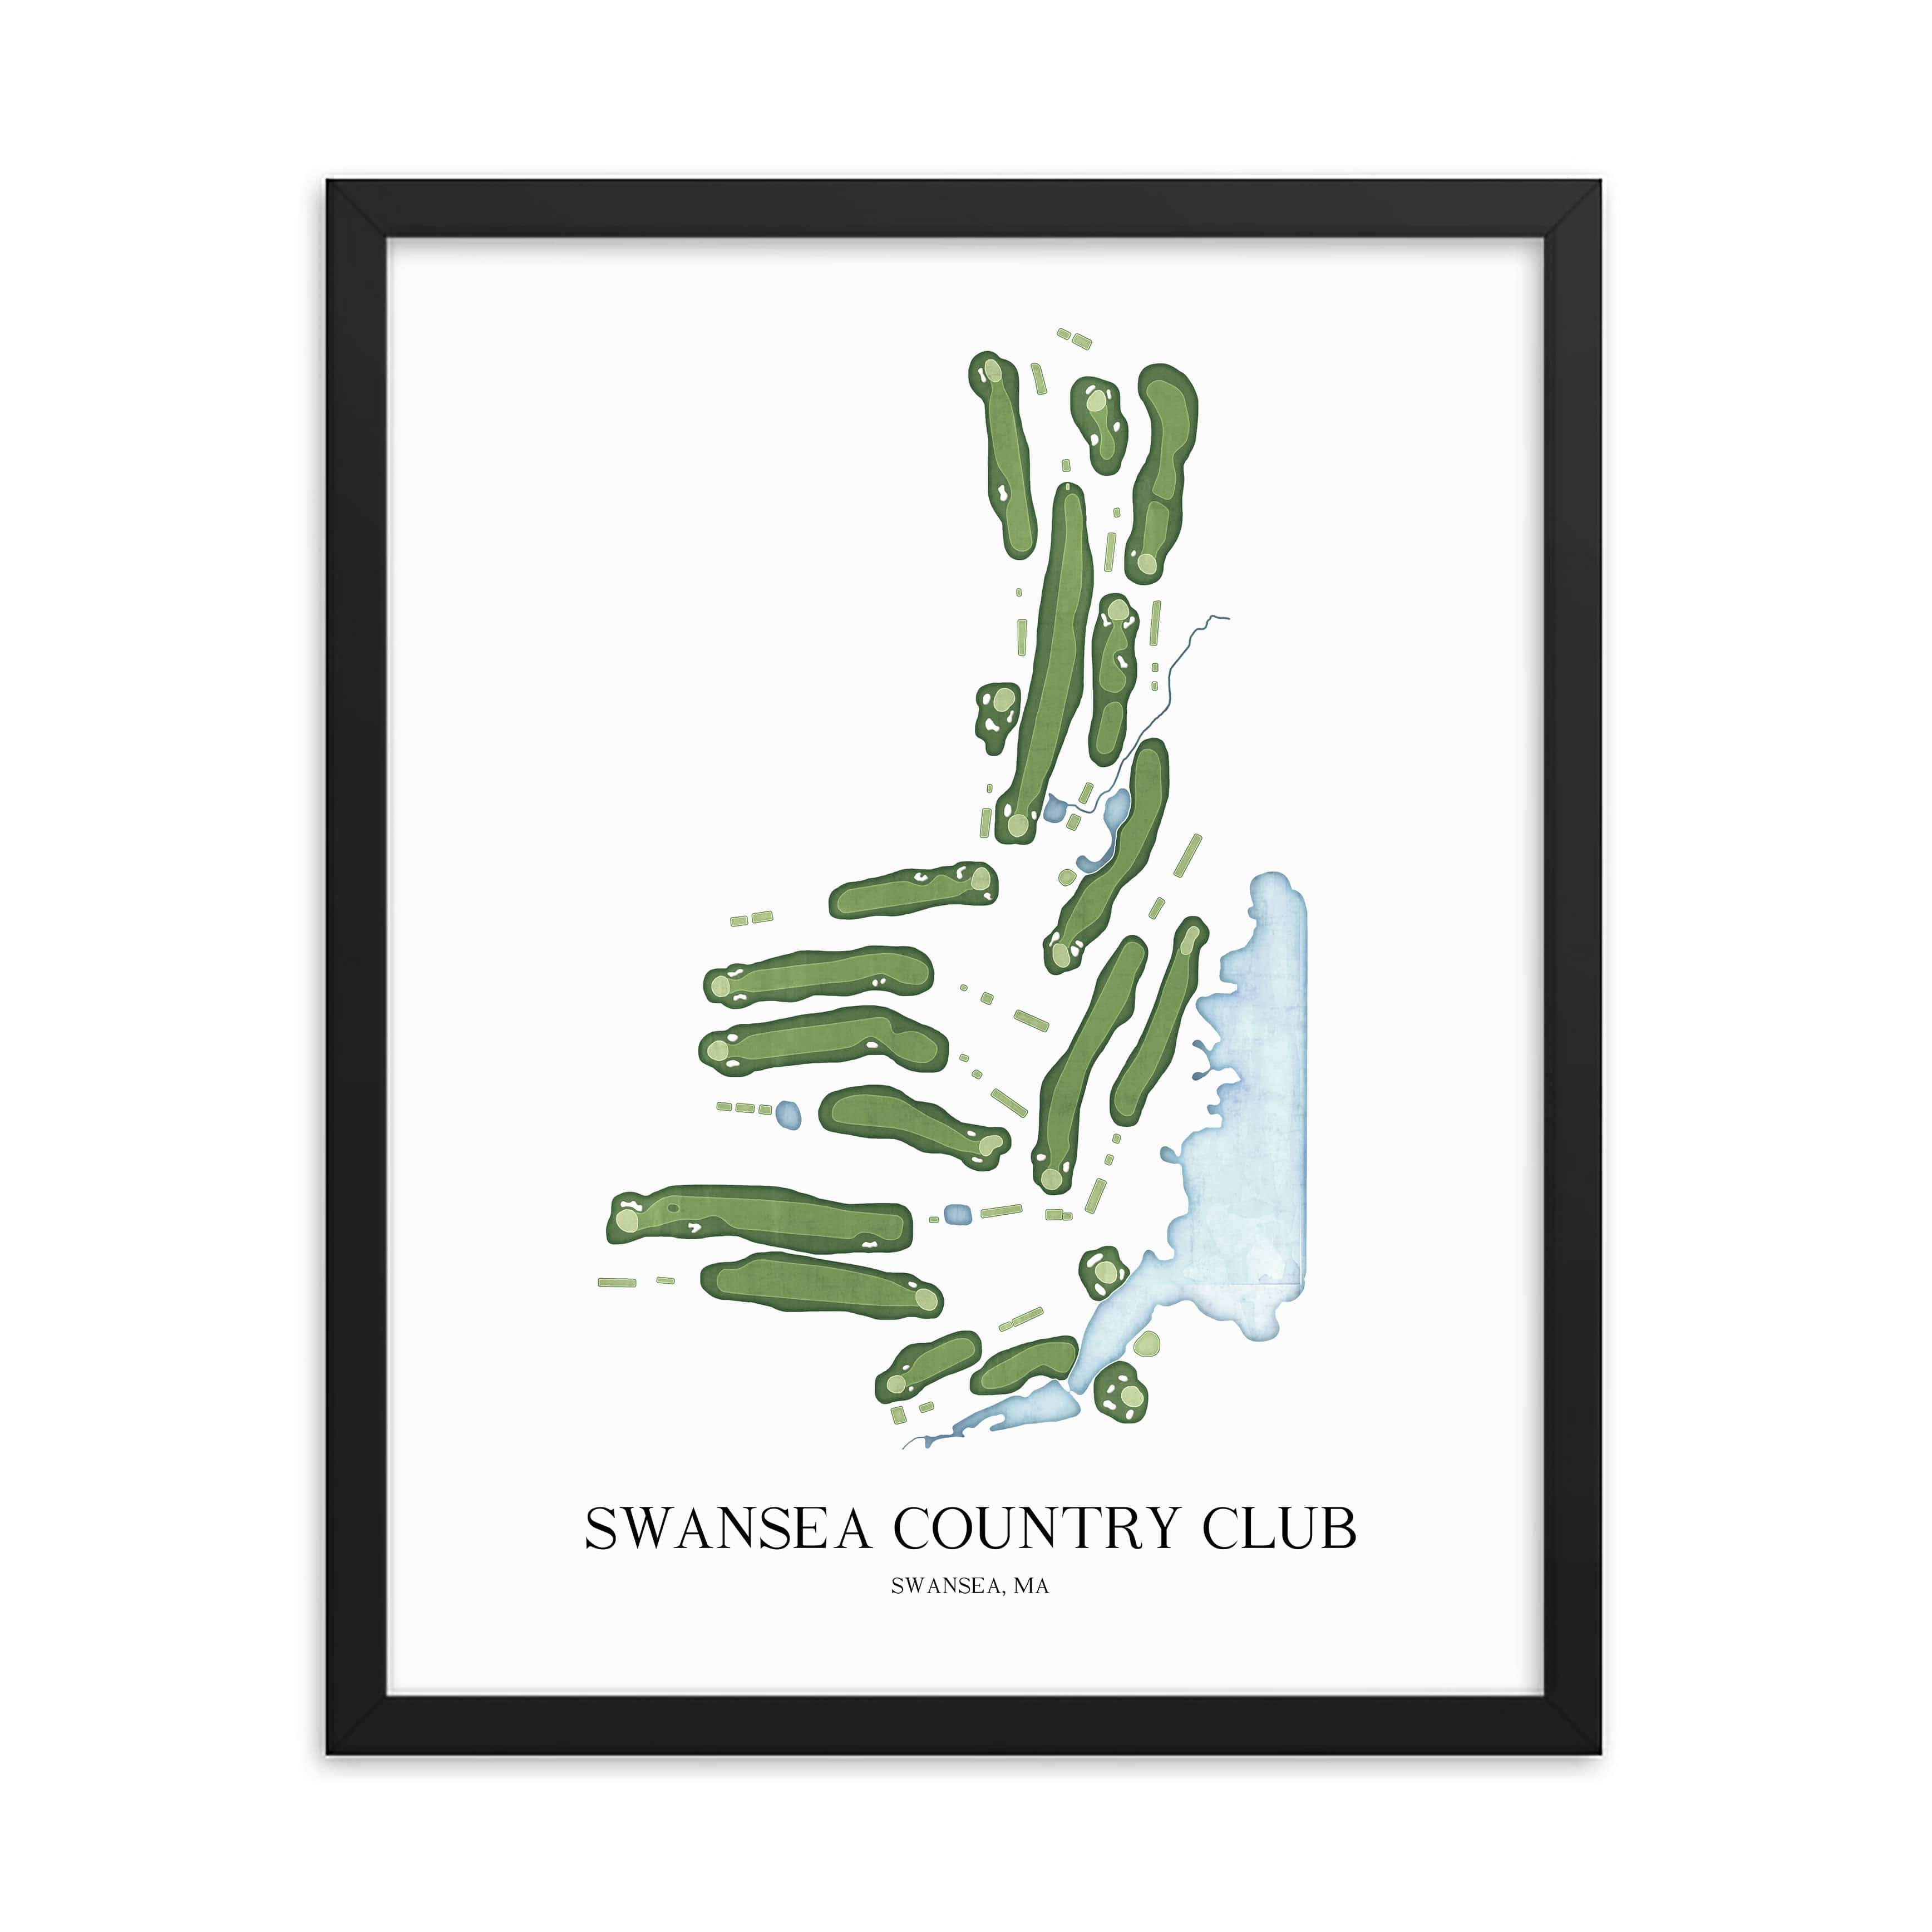 The 19th Hole Golf Shop - Golf Course Prints -  Swansea Country Club Golf Course Map